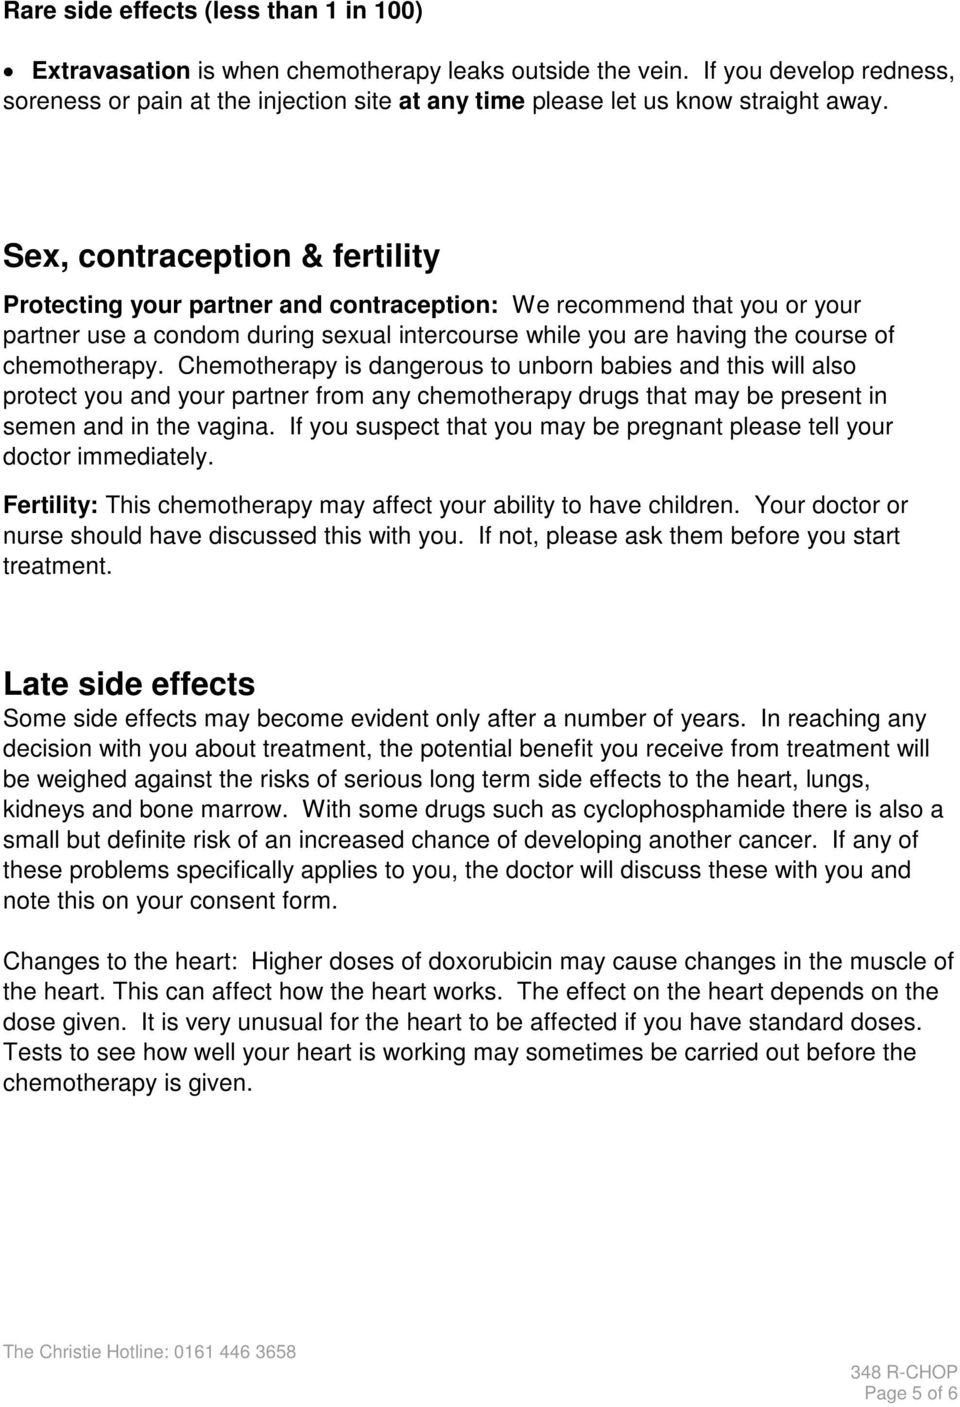 Sex, contraception & fertility Protecting your partner and contraception: We recommend that you or your partner use a condom during sexual intercourse while you are having the course of chemotherapy.